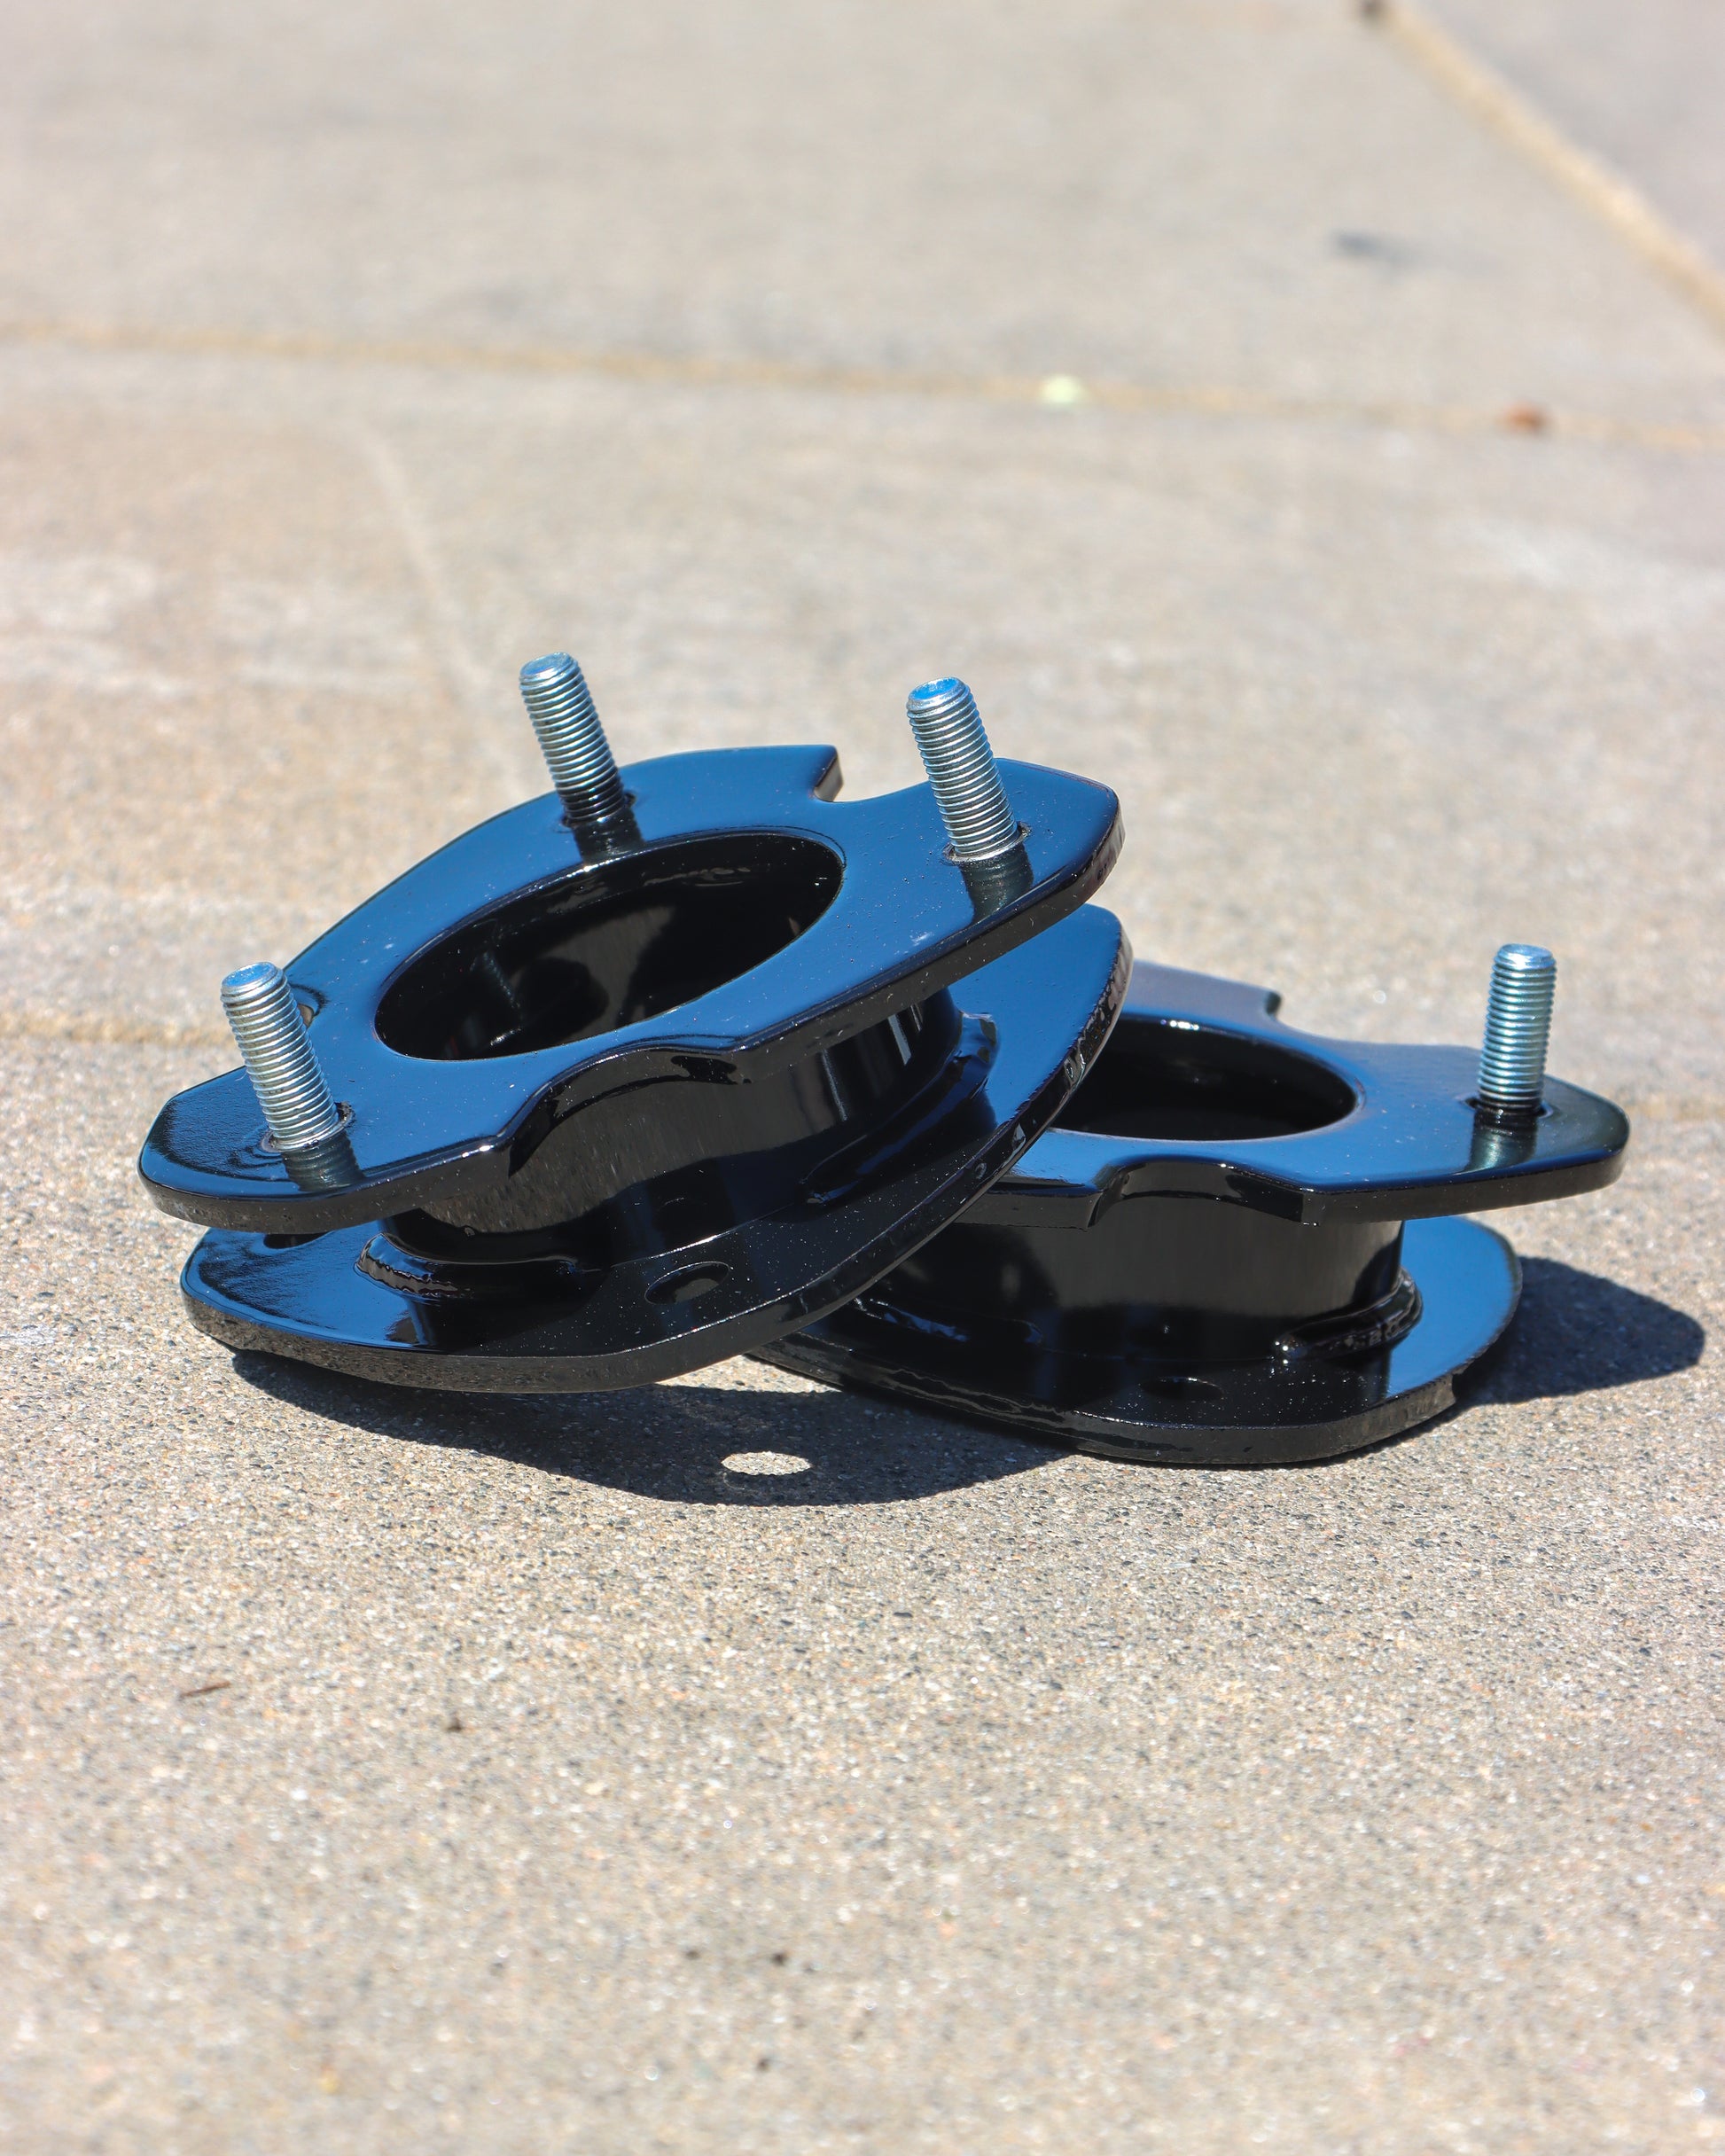 Strut Spacers on Display on the ground.